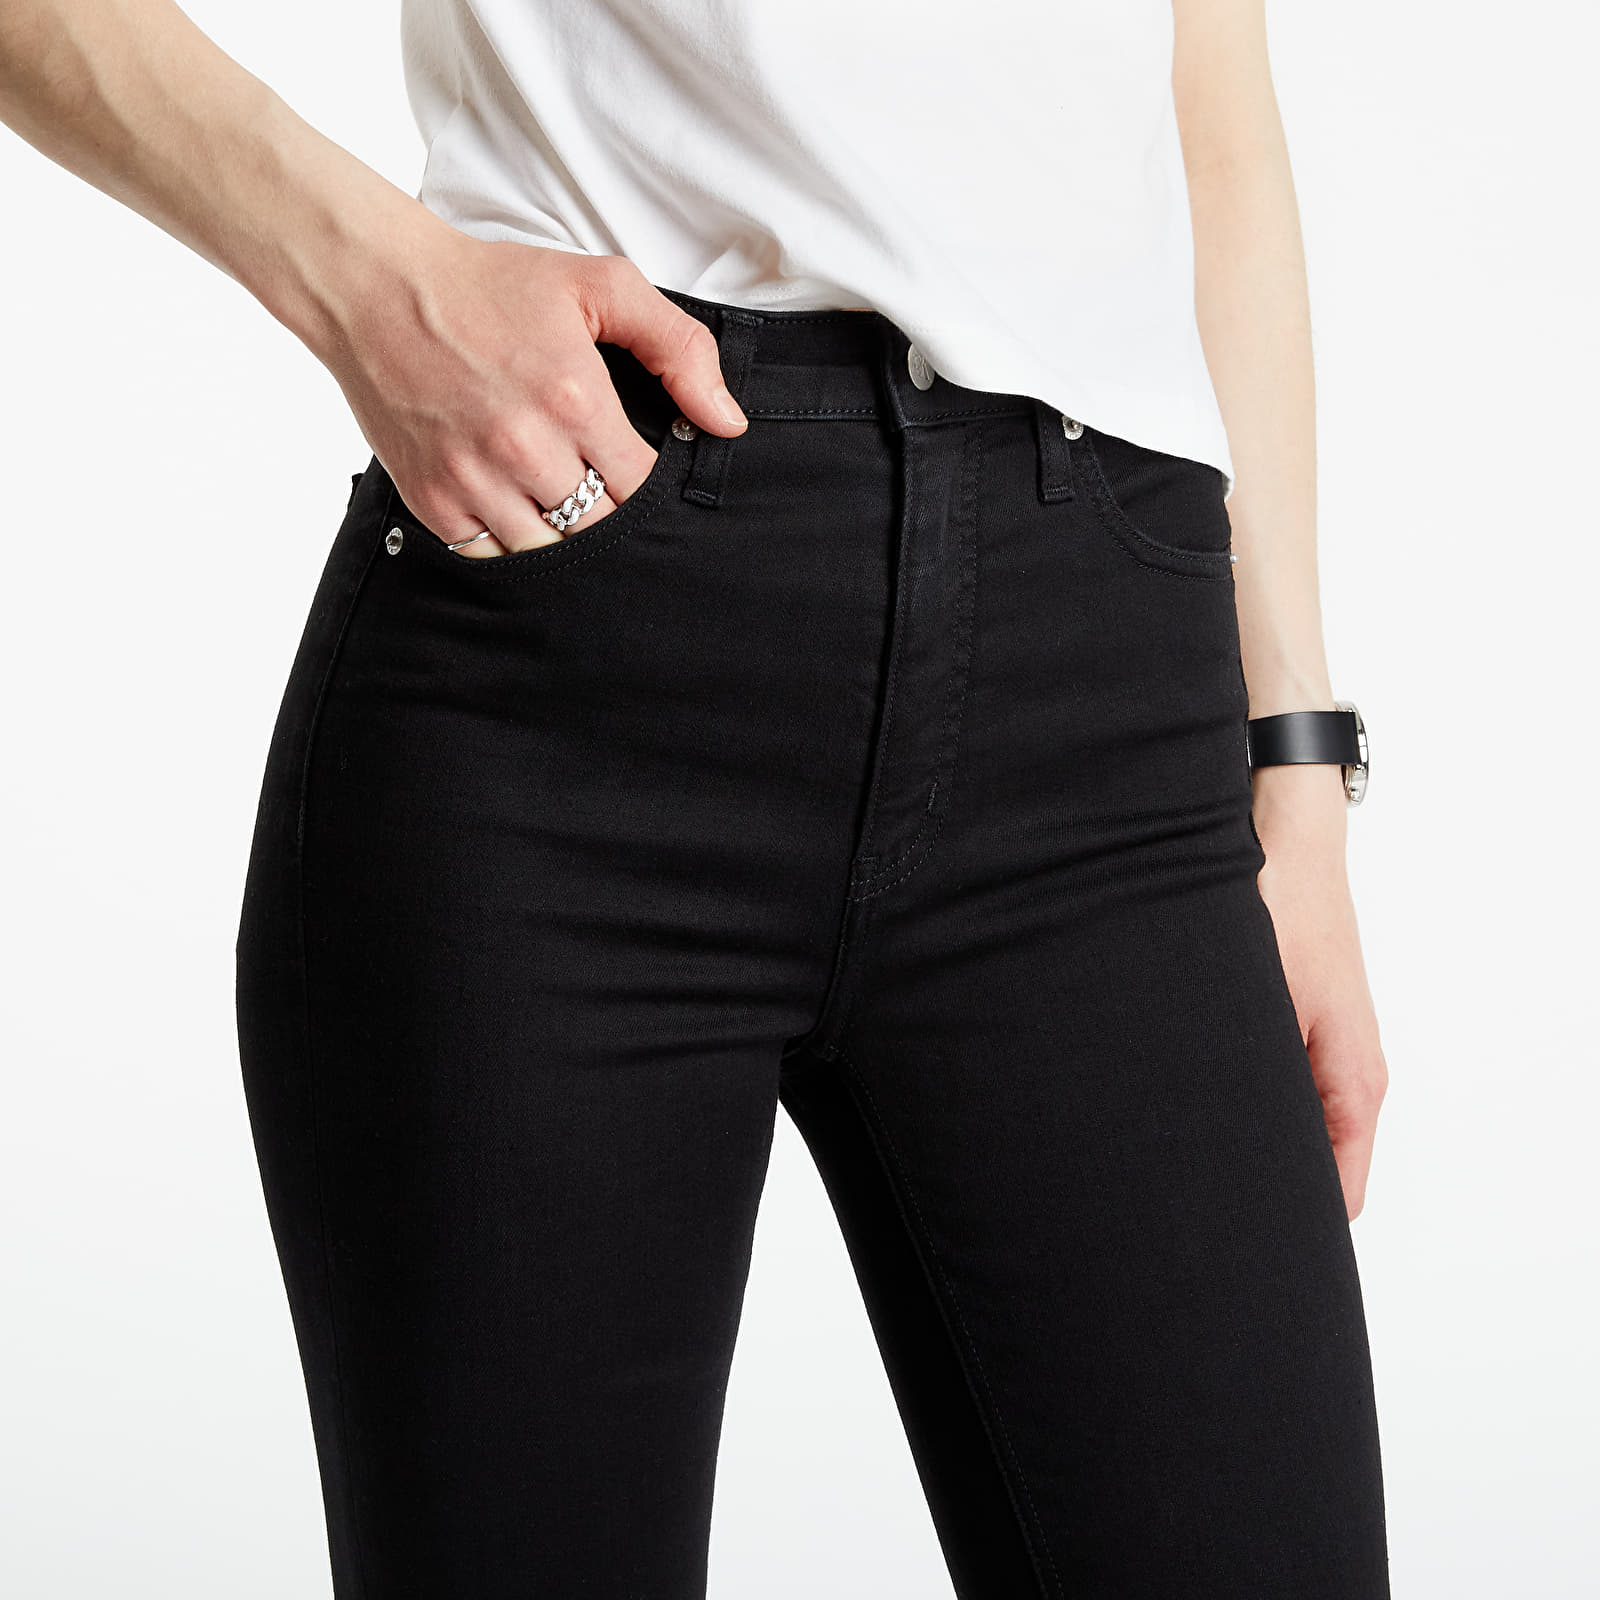 Pants and jeans Klein Super Skinny Calvin Ankle Footshop Jeans | High Rise